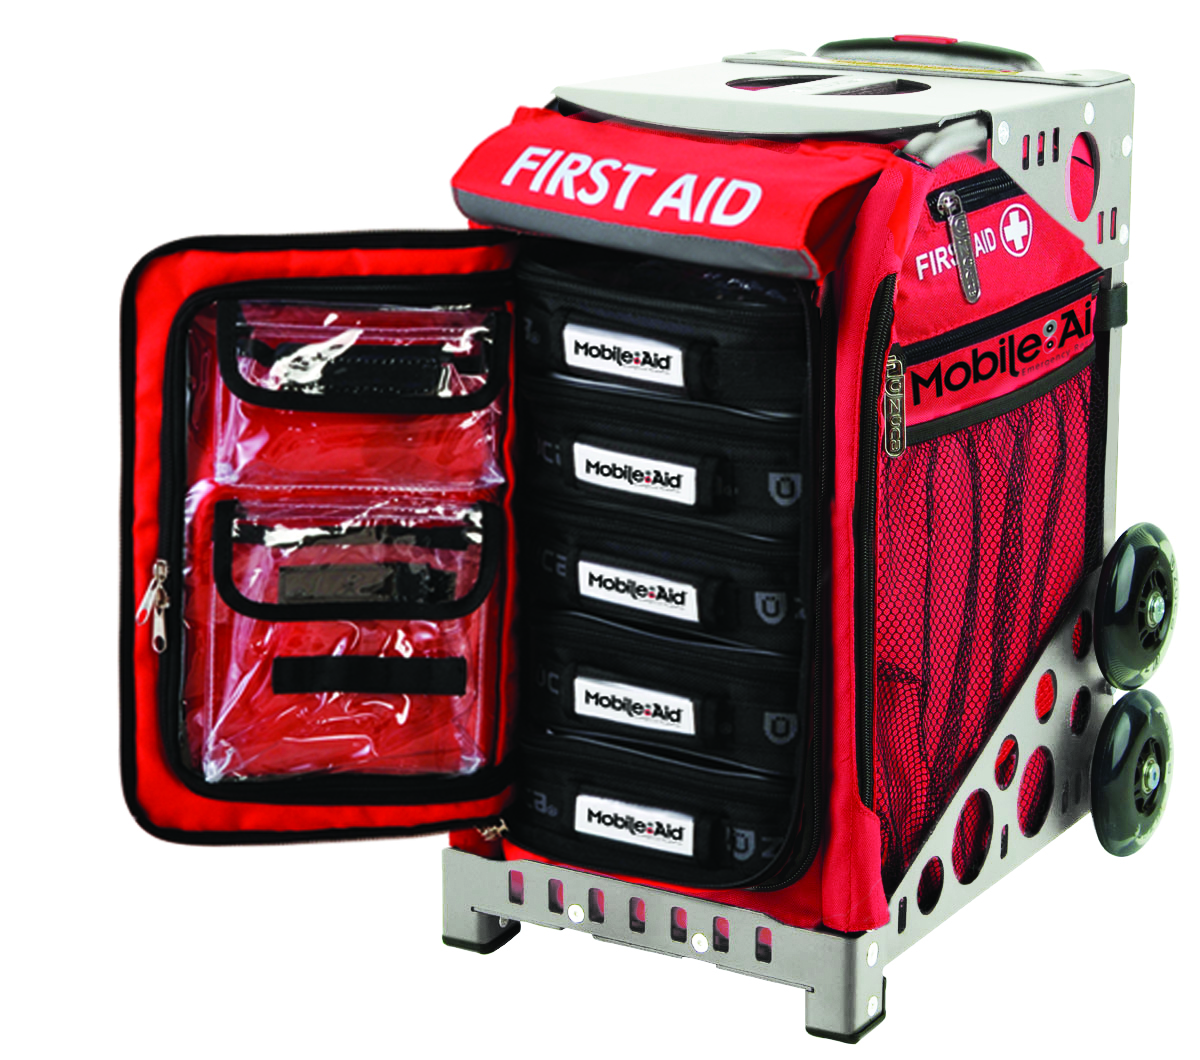 MobileAid First Aid Organizer Box - Small (unlabeled)-Lifeguard Equipment